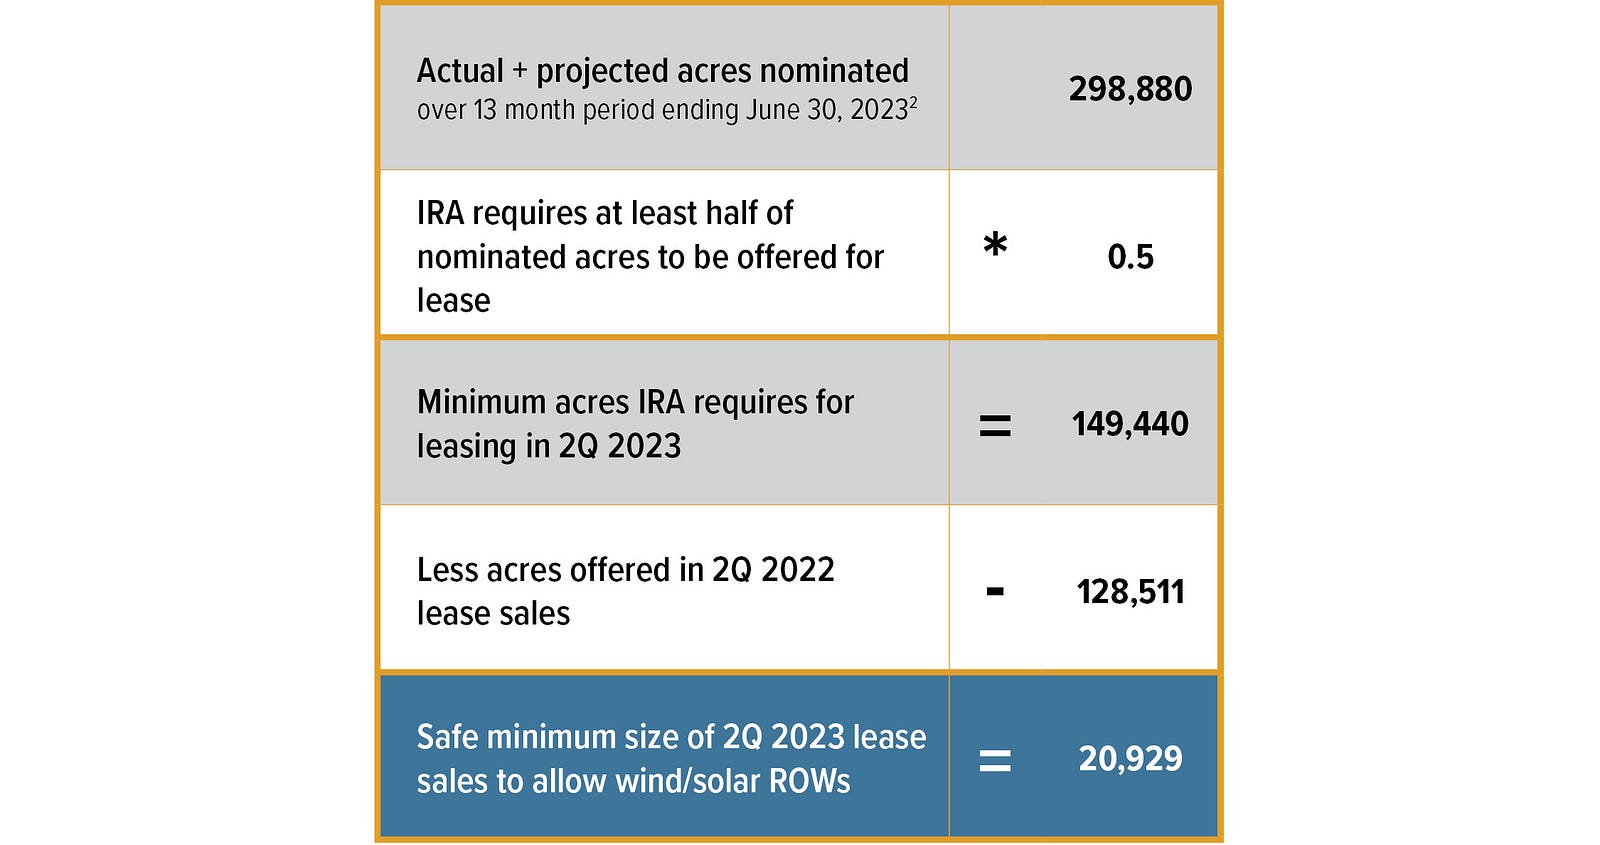 Actual + projected acres nominated over 13 month period ending June 30, 2023 298,880 IRA requires at least half of nominated acres to be offered for lease * .5 Minimum acres IRA requires for leasing in 2Q 2023 = 149,440 Less acres offered in 2Q 2022 lease sales — 128,511 Safe minimum size of 2Q 2023 lease sales to allow wind/solar ROWs = 20,929